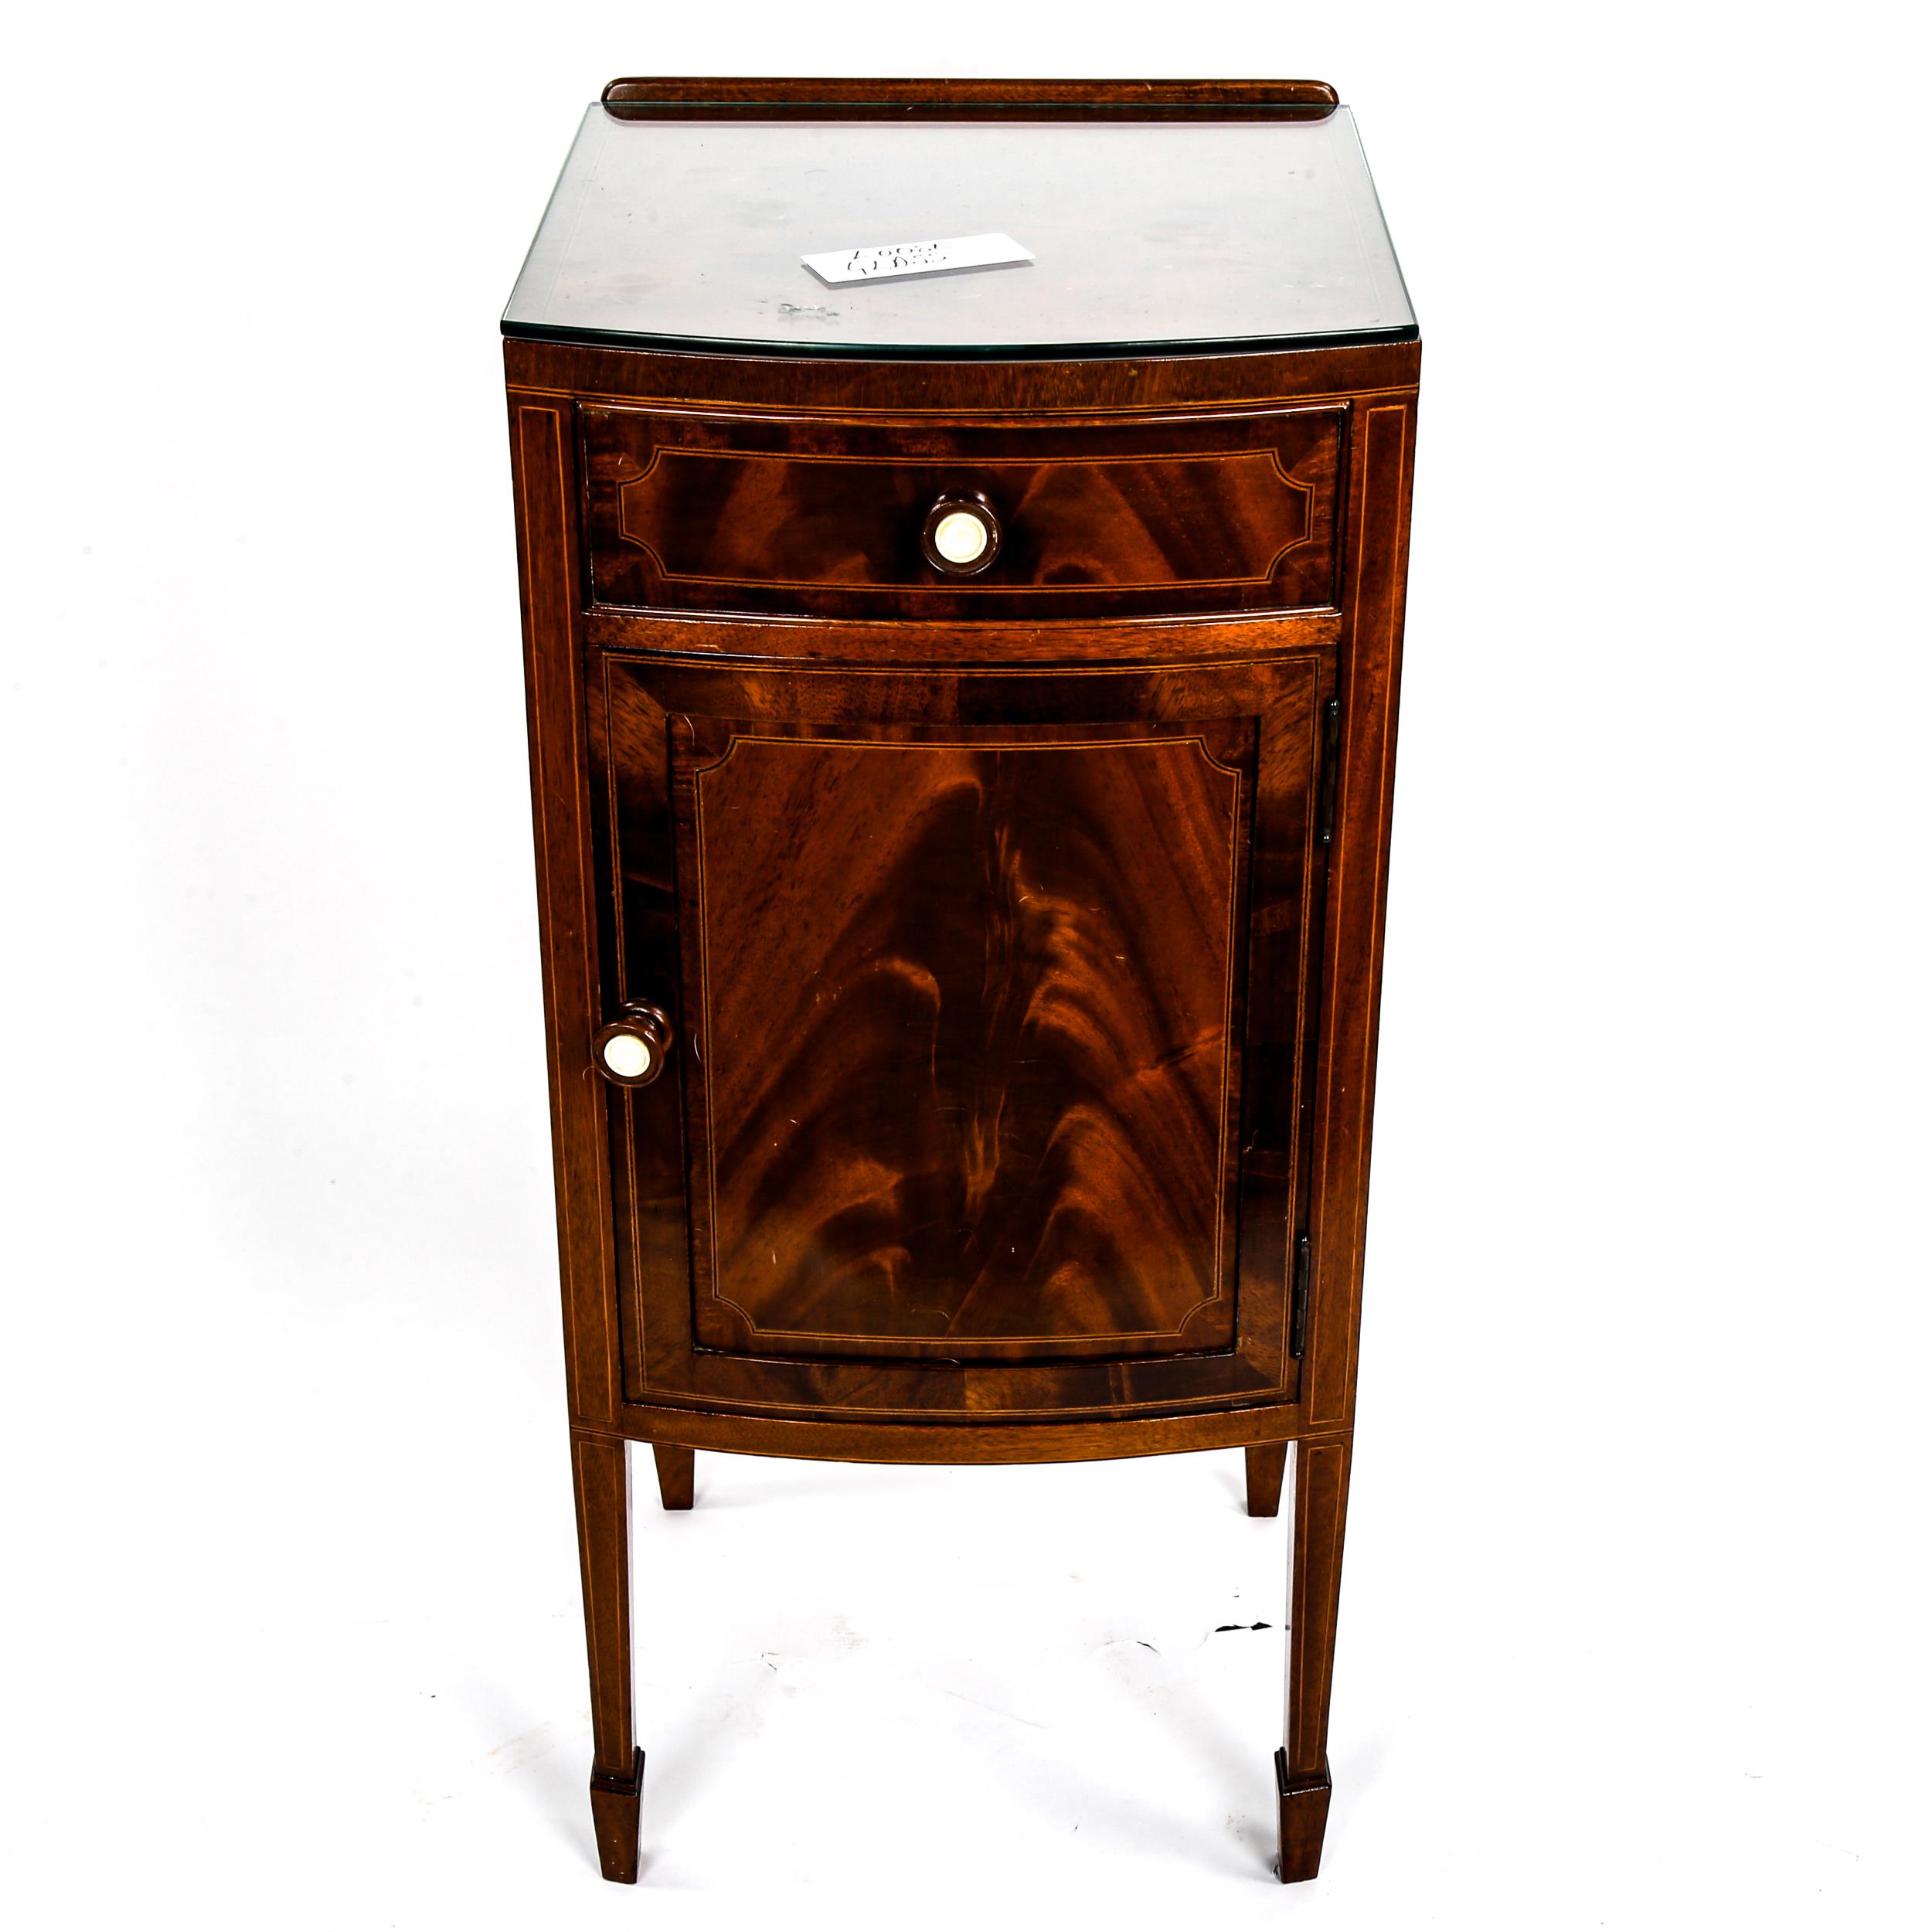 An Edwardian mahogany bow-front bedside cupboard, with frieze drawer and ivory-mounted handles,